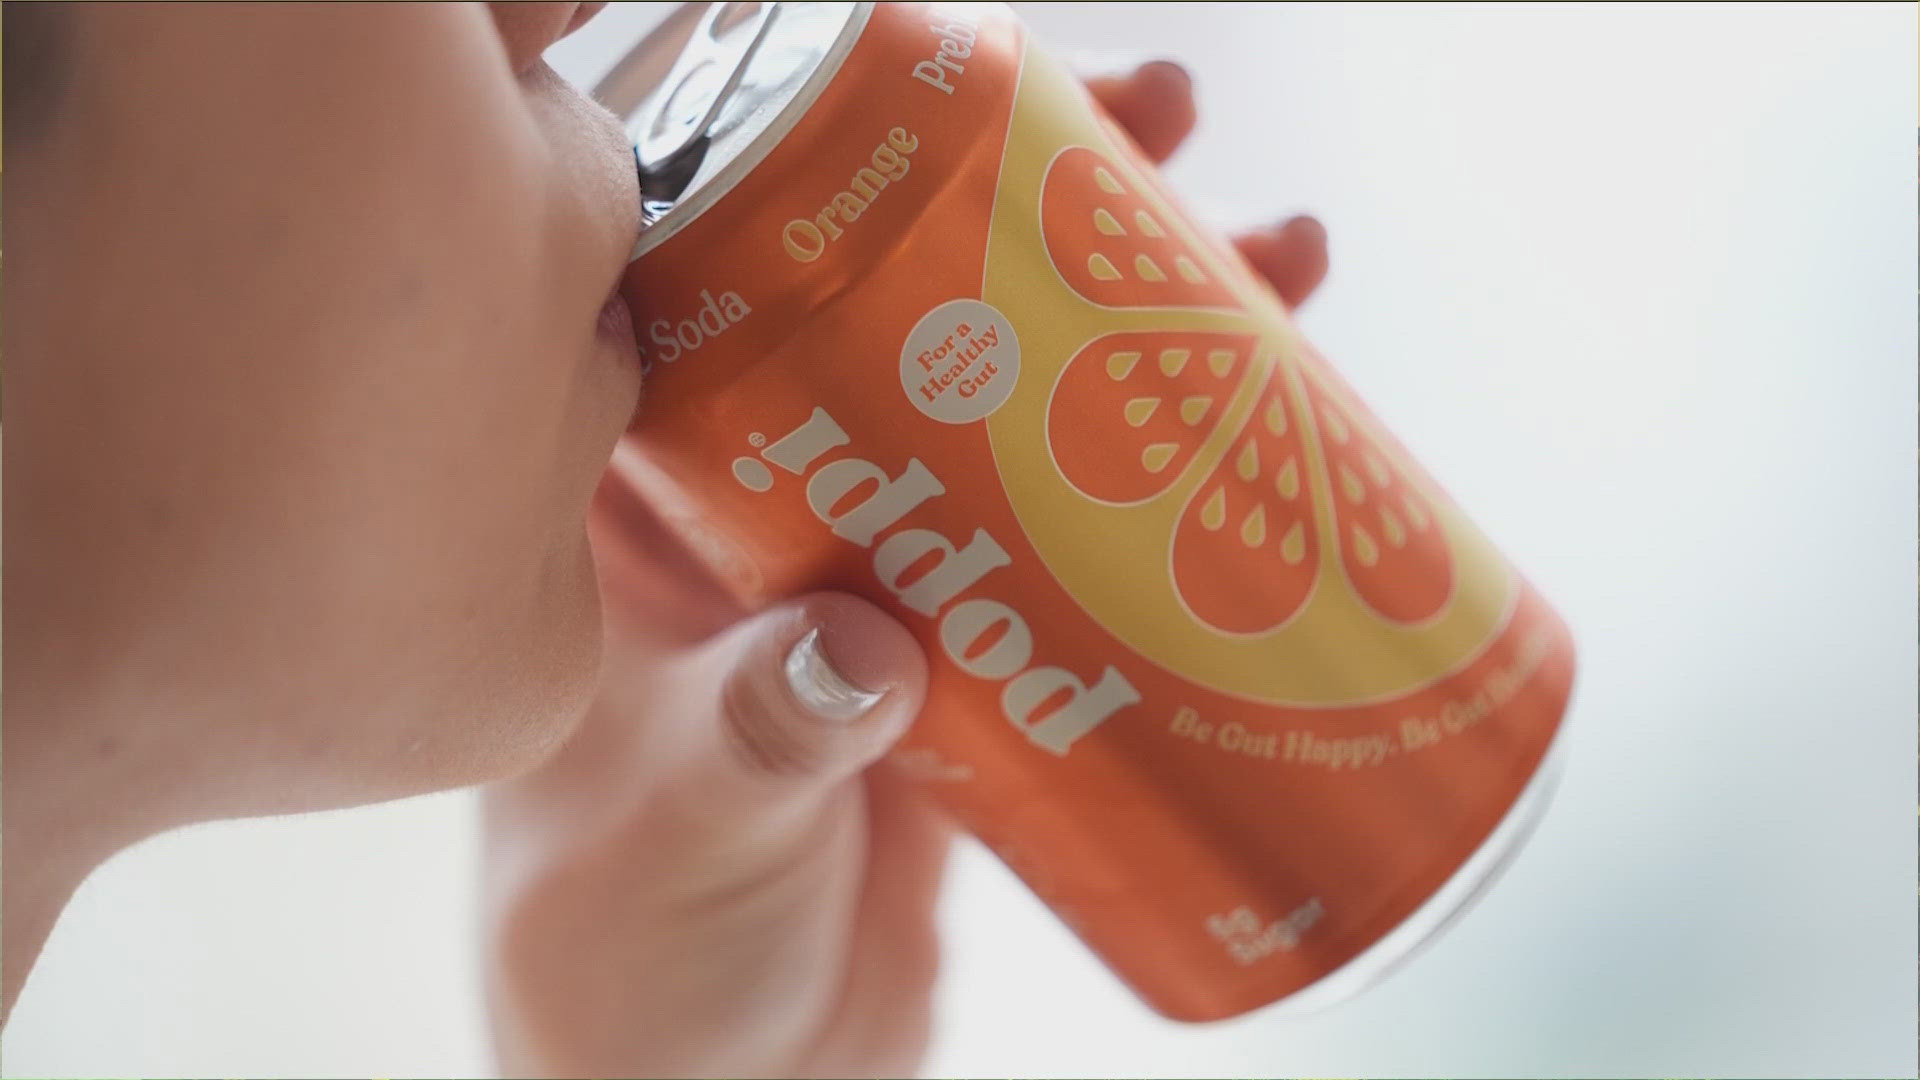 The Austin-based soda company is being sued by a woman who believes the product is misleading customers in its advertising.